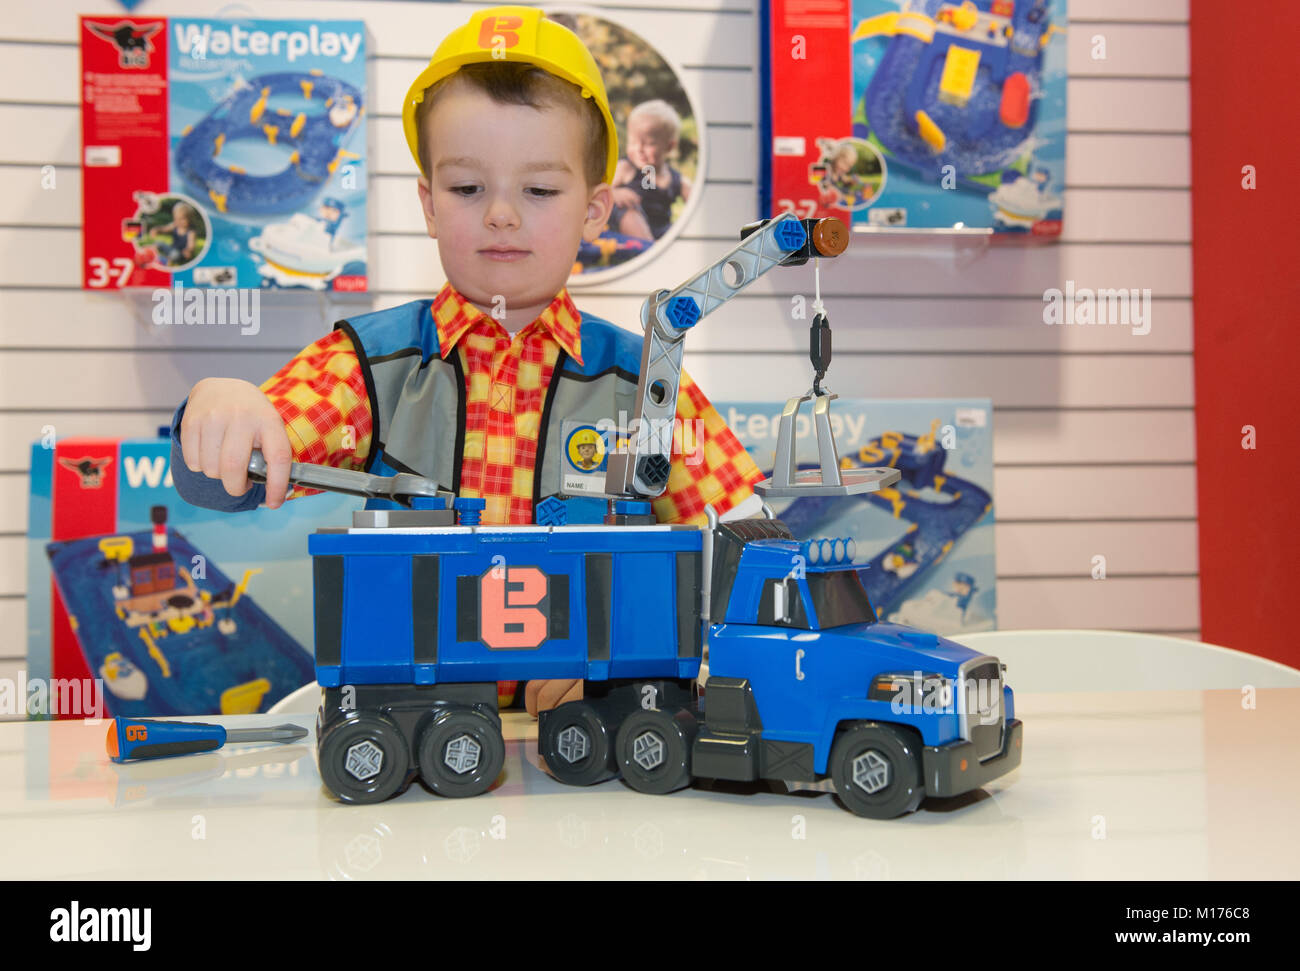 Alexander plays with a toy vehicle called 'Schleppo' by Smoby during the annual press meeting of the toy manufacturers Simba Dickie and Maerklin regarding the Nuremberg International Toy Fair, in Fuerth, Germany, 26 January 2018. Photo: Timm Schamberger/dpa Stock Photo